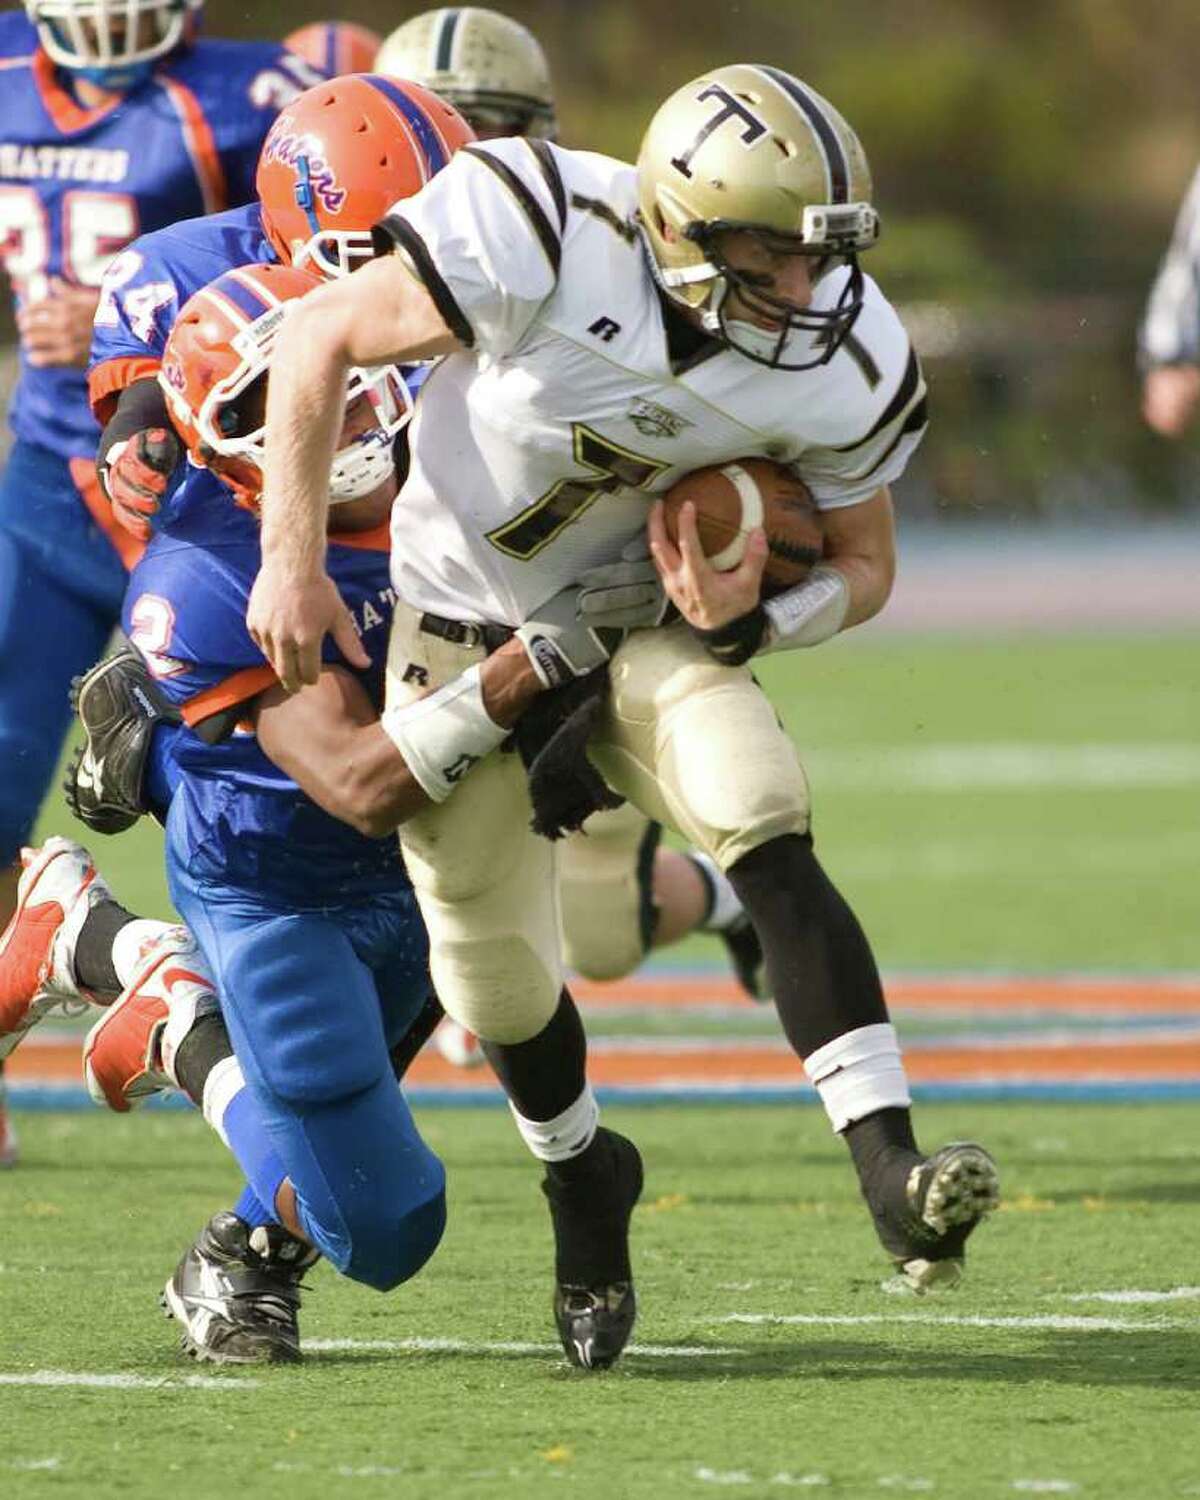 Trumbull's Ian Milne picks up yardage with Danbury's Aaron Dixon hanging on to make the stop during their FCIAC game Saturday, Oct. 30, 2010, at Danbury High School.